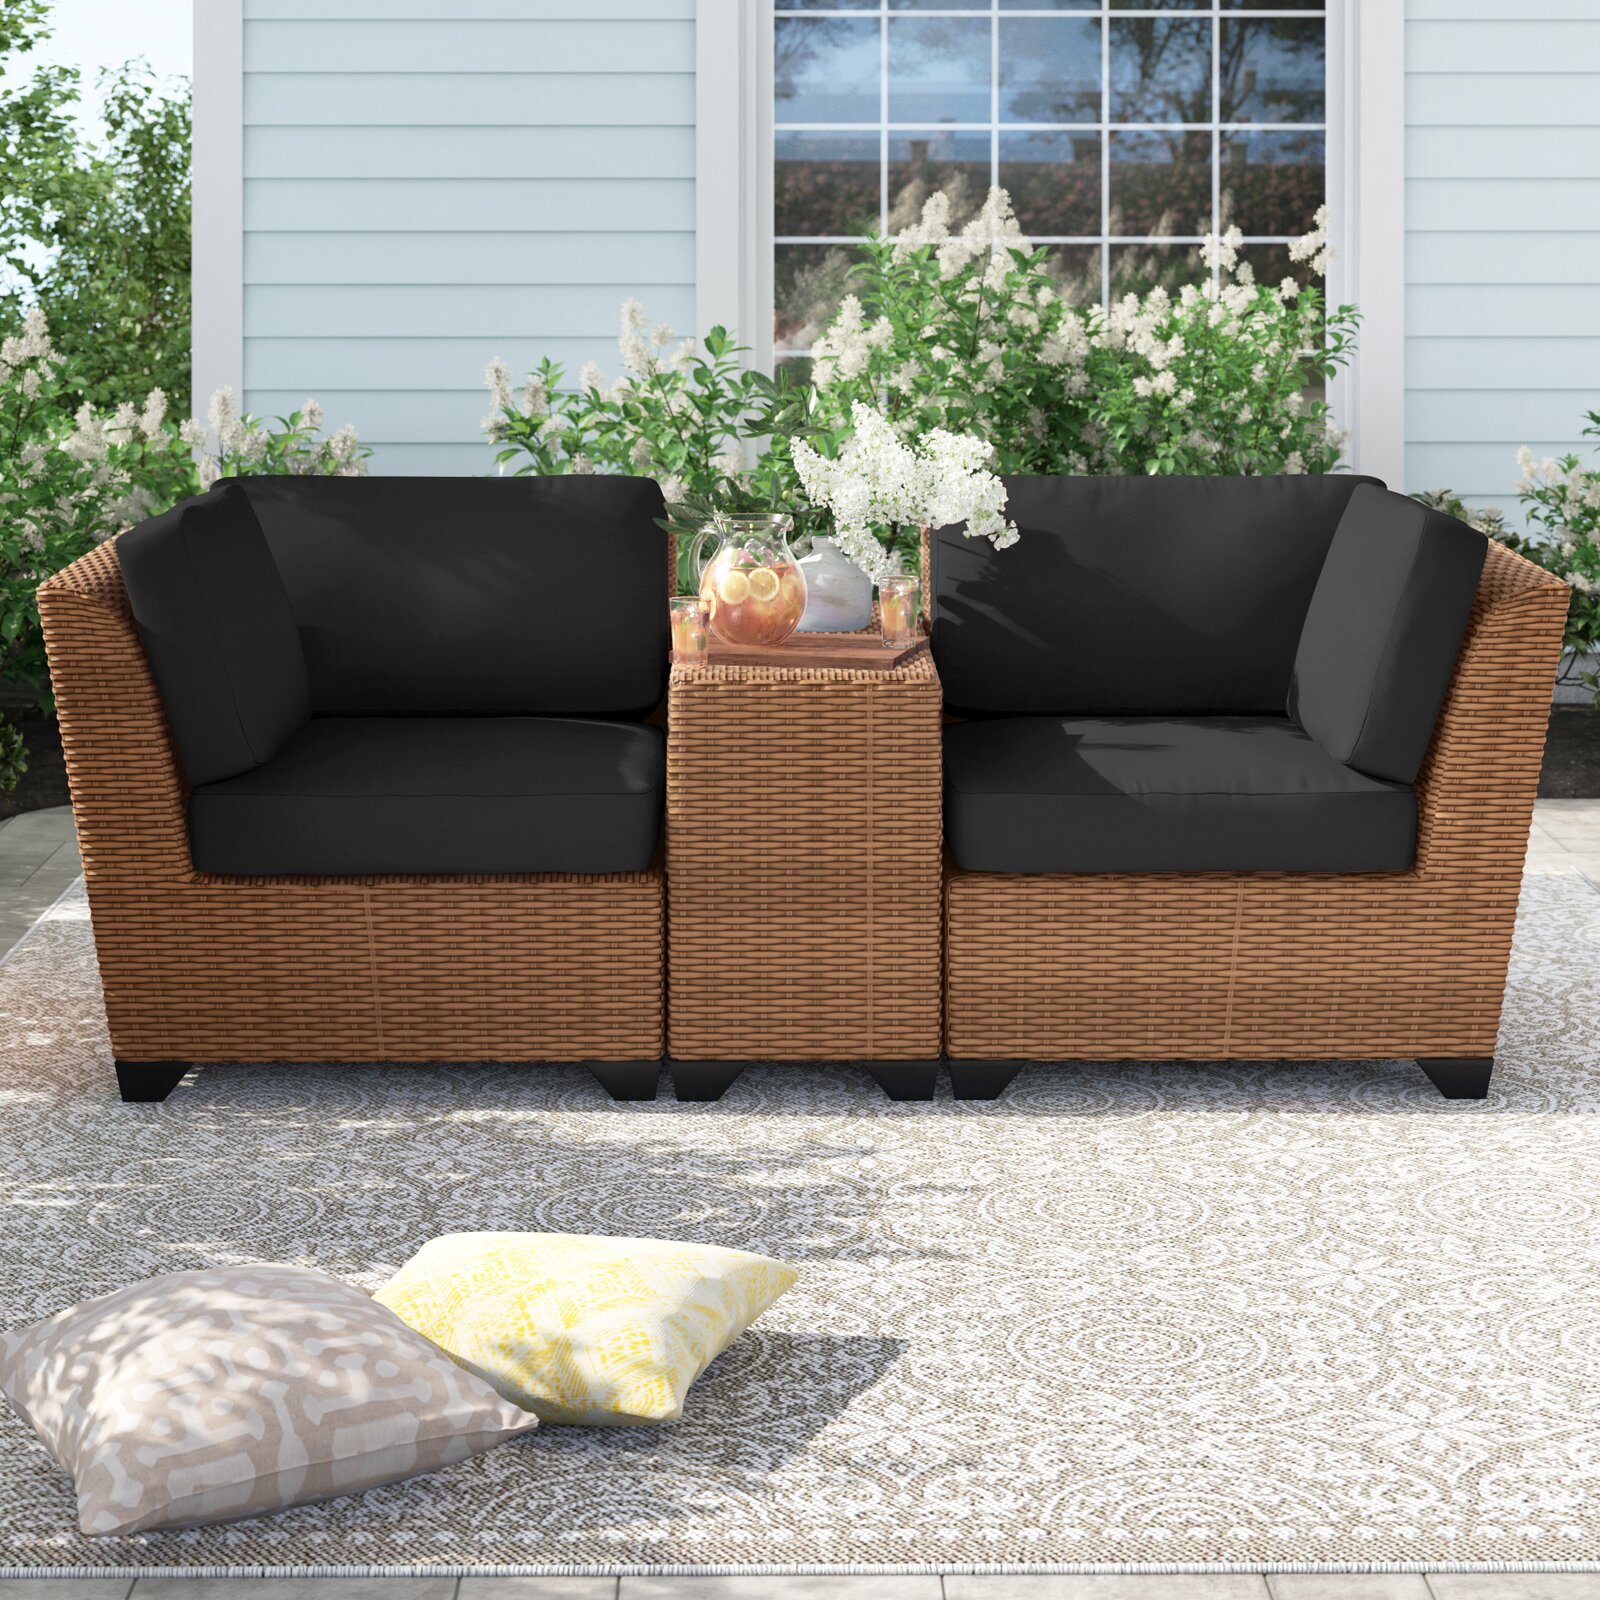 Sol 72 Outdoor? Waterbury Wicker/Rattan 2 - Person Seating Group with Cushions & Reviews